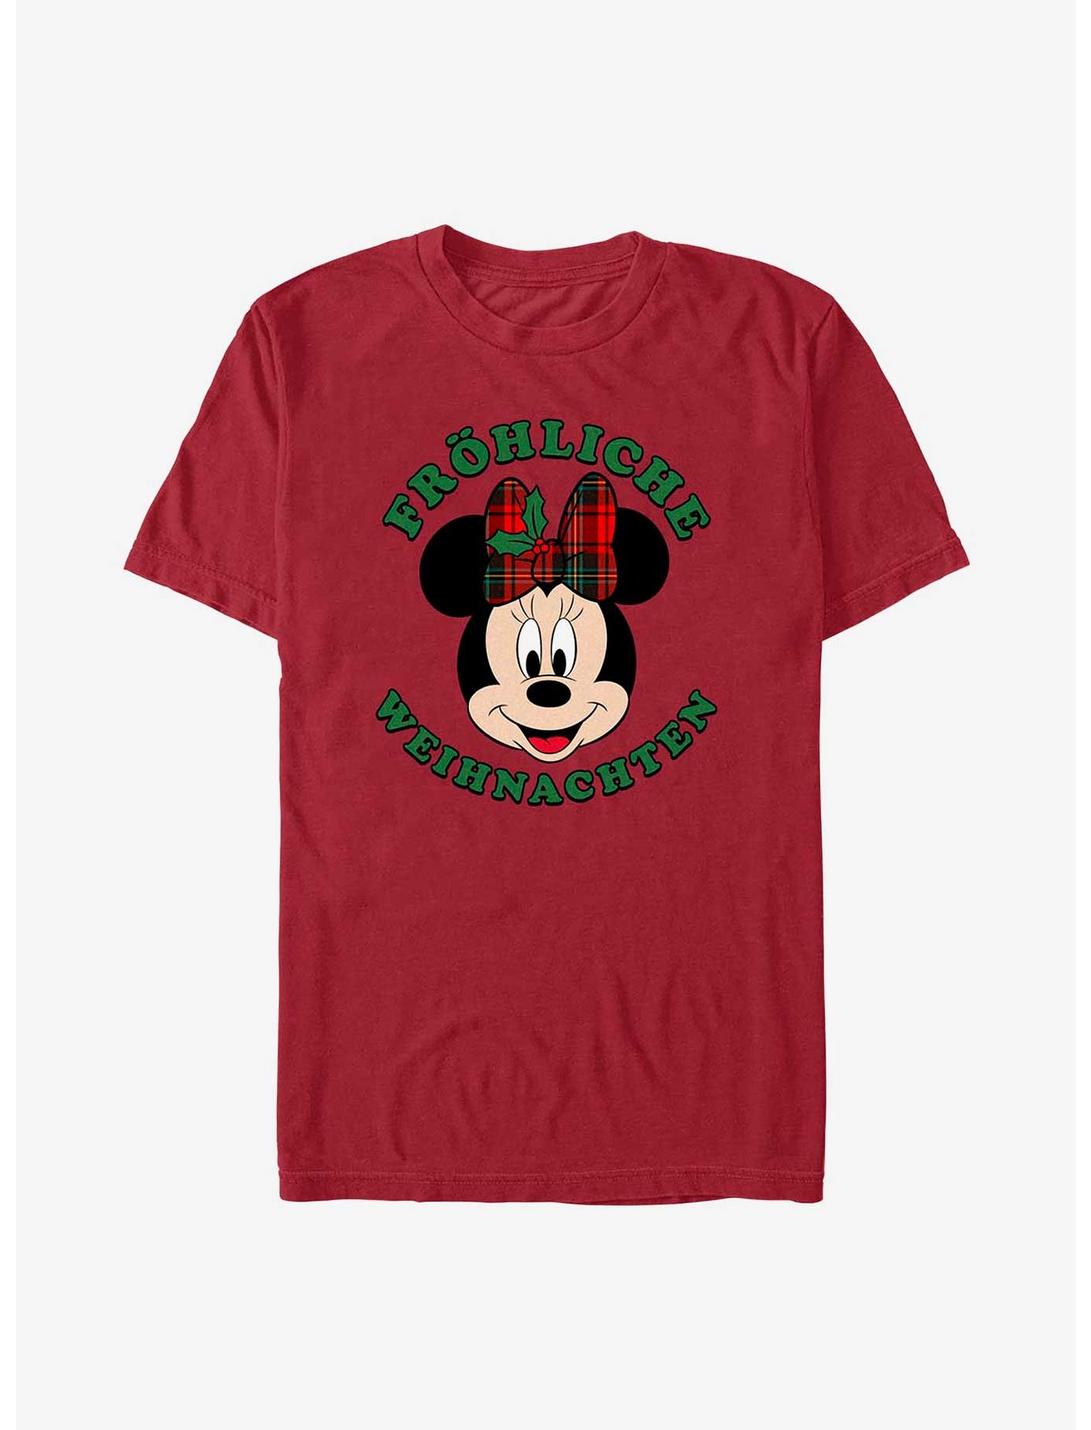 Disney Minnie Mouse Frohliche Weihnachten Merry Christmas in German T-Shirt, CARDINAL, hi-res